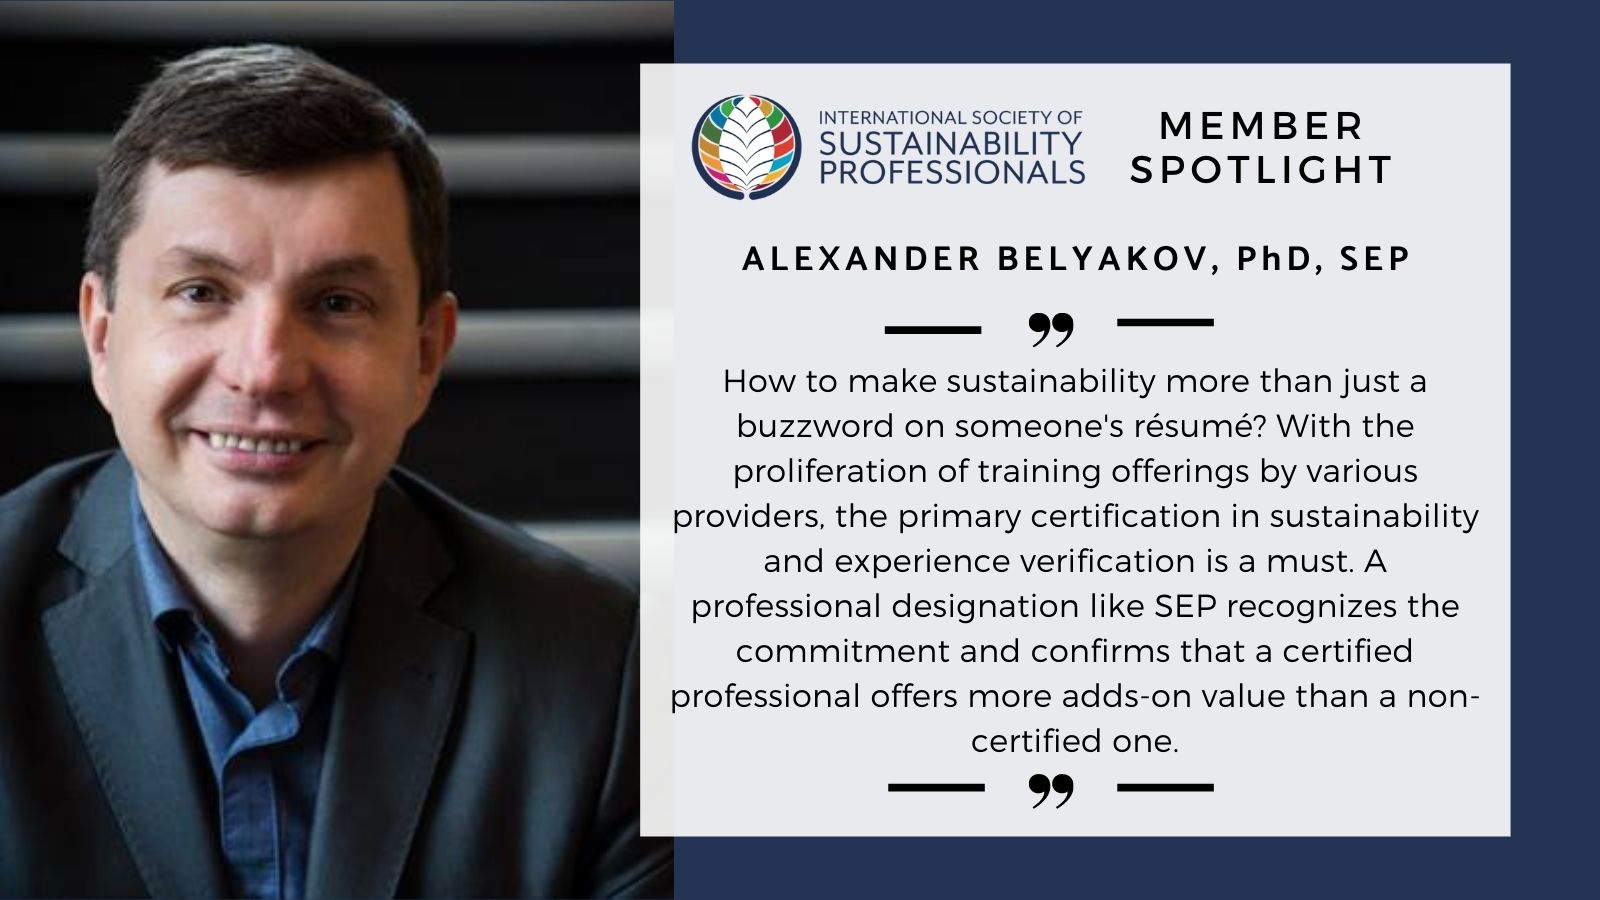 Photo of Alexander Belyakov that says "International Society of Sustainability Professionals - Member Spotlight" and has a quote from him about SEP, then says "Consultant to UN Agencies and Sustainability Educator"